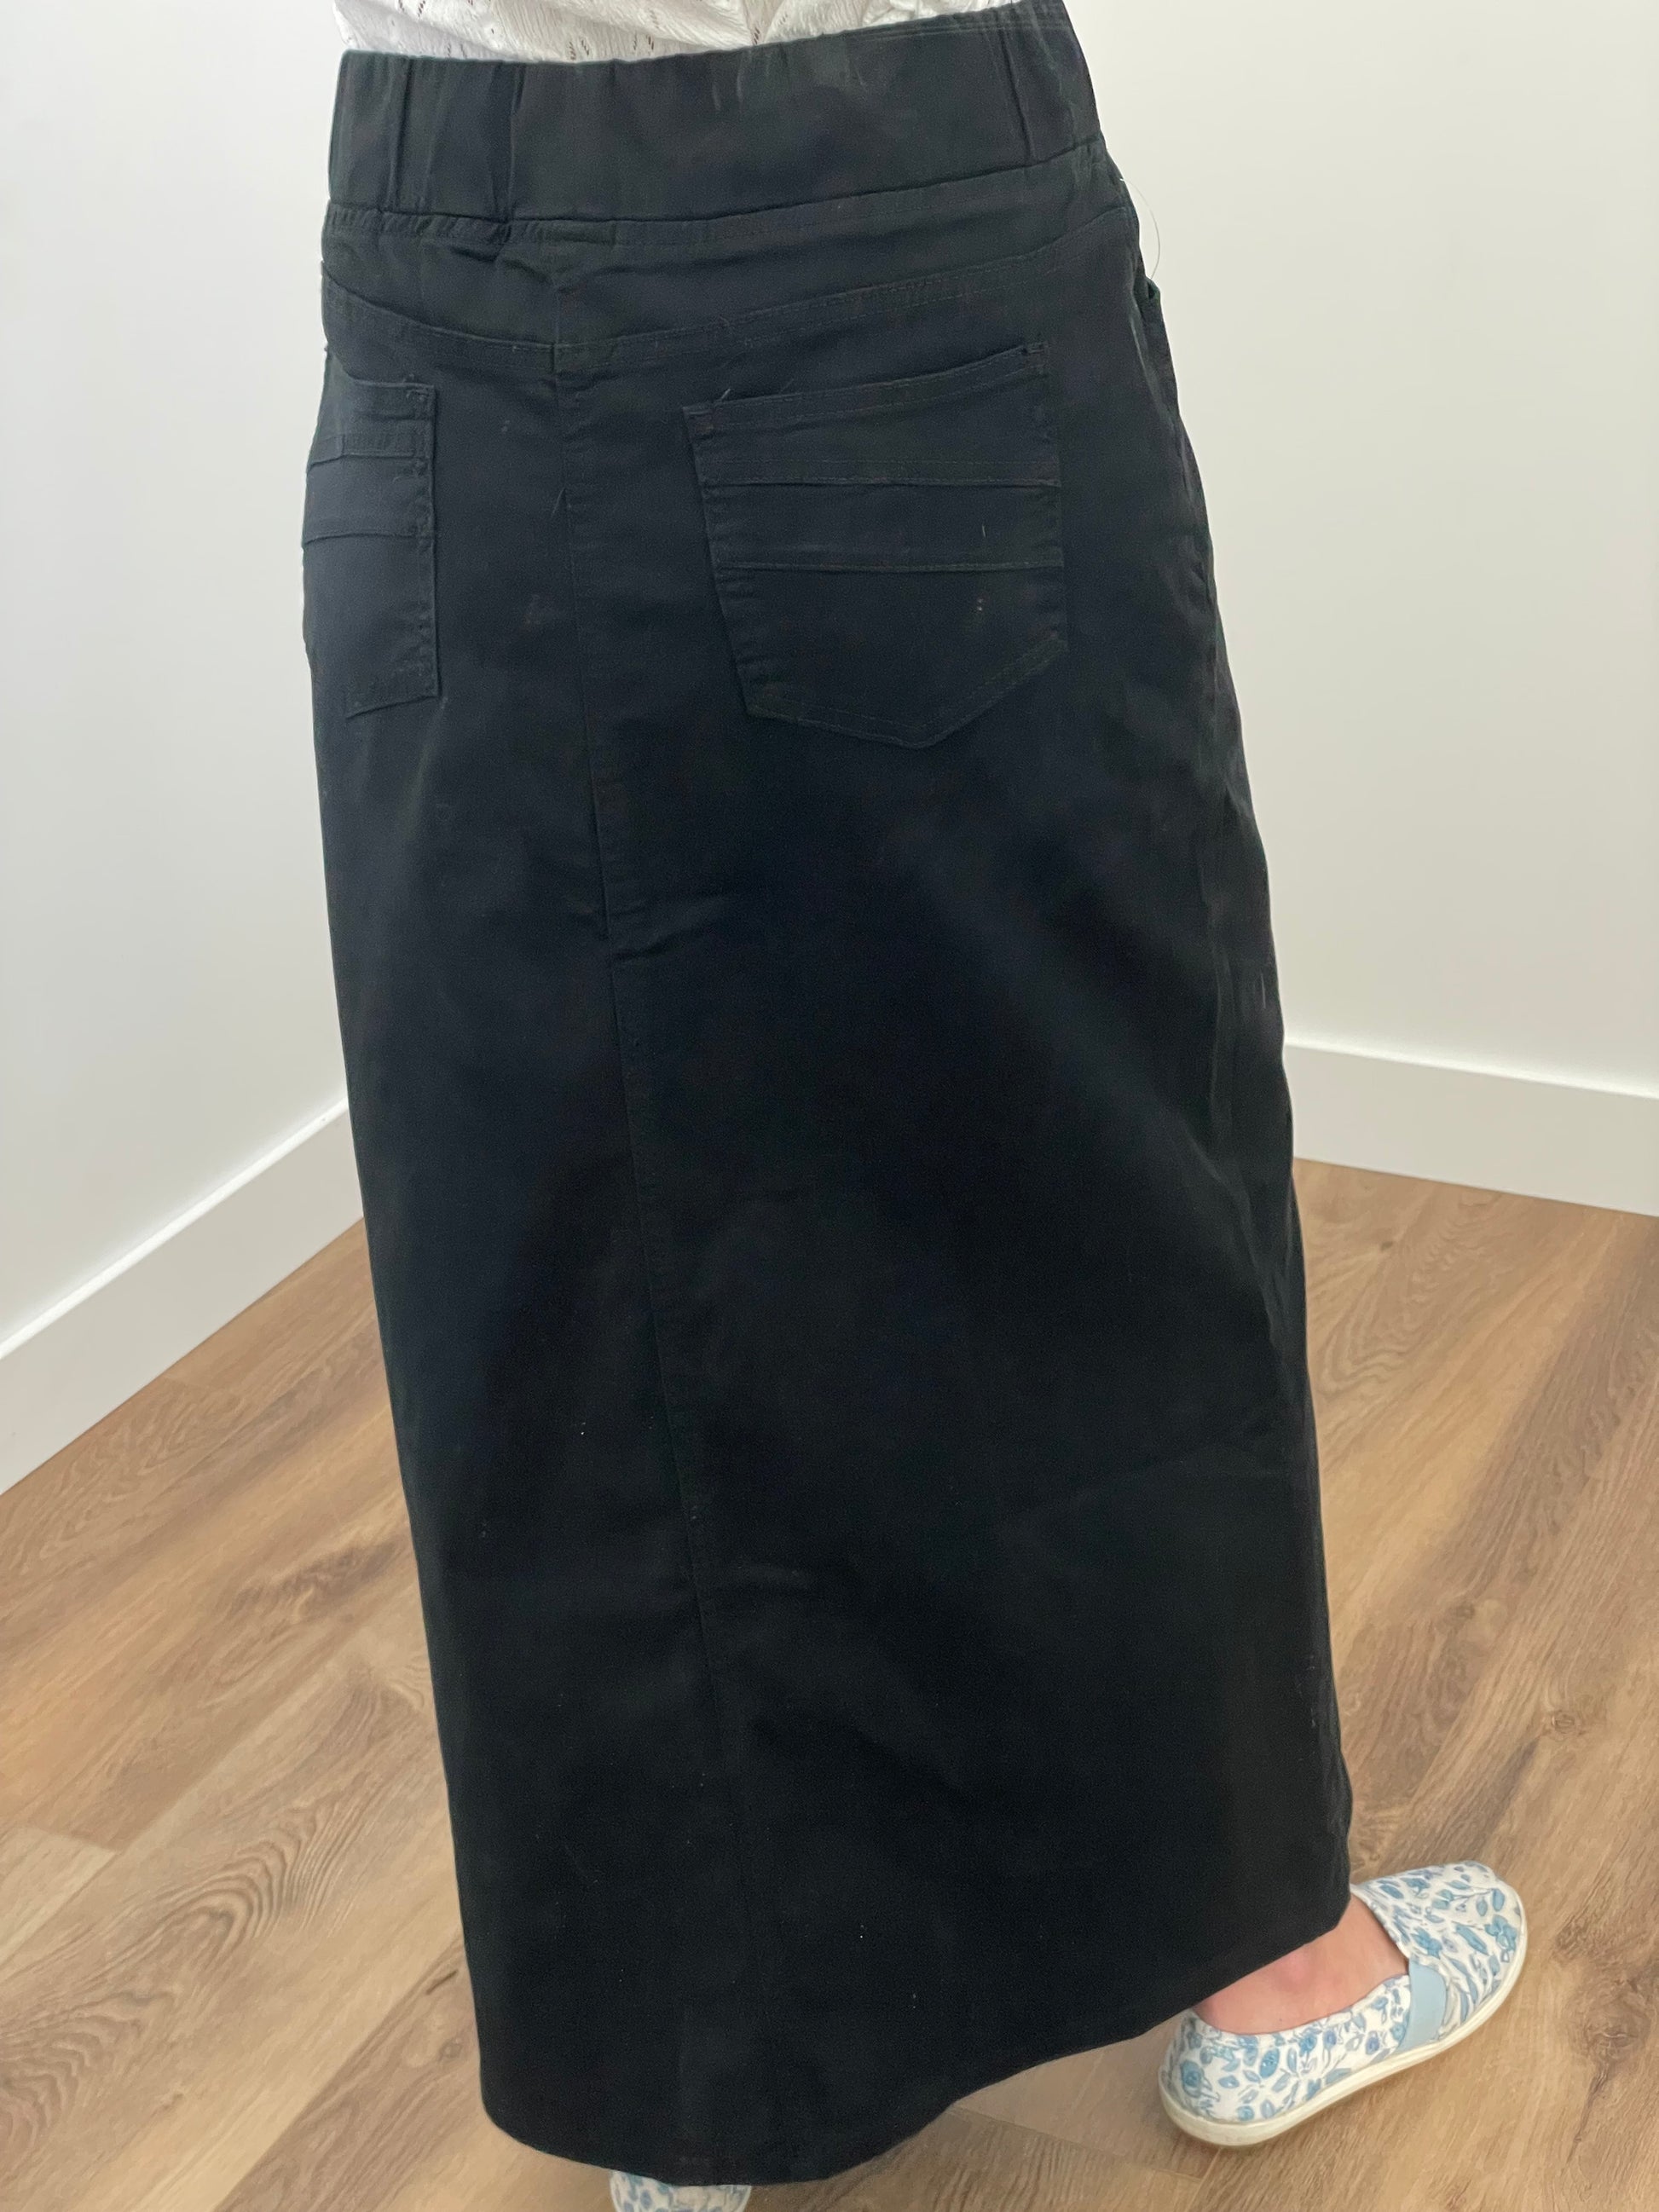 "Mila" Black Long Twill Skirt With Elastic Waistband - Ladies & Lavender Boutique